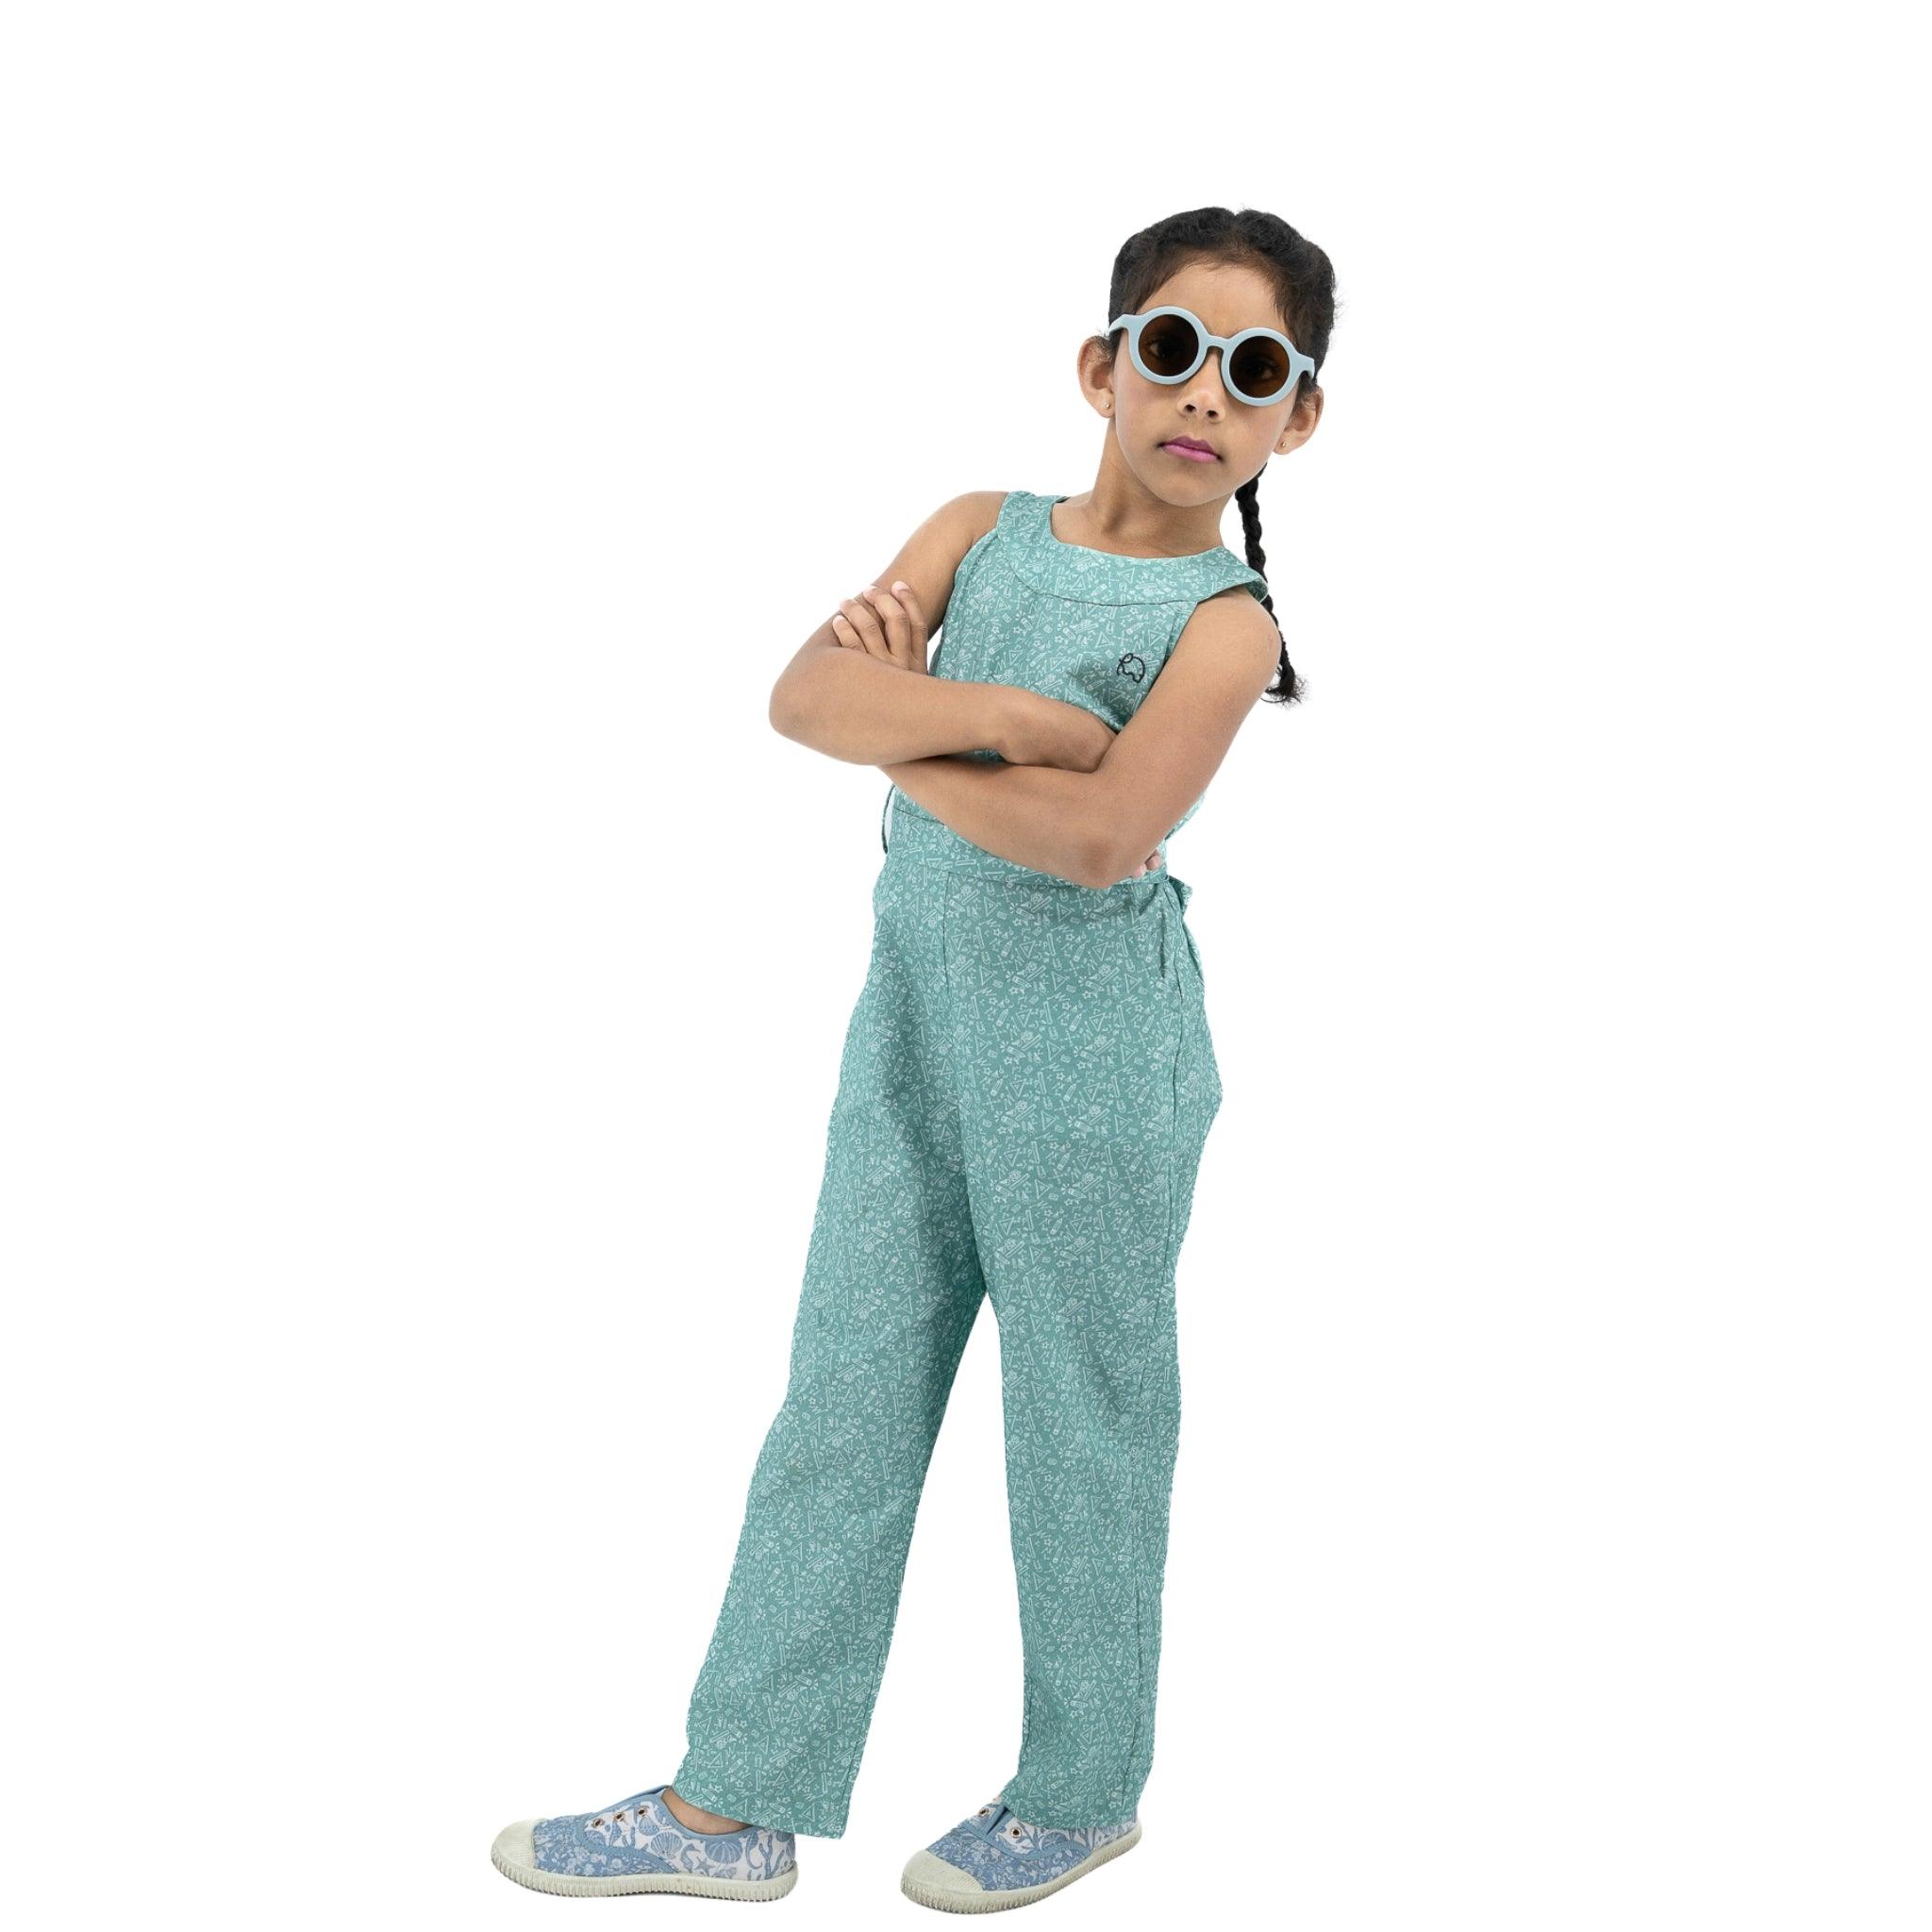 Young girl wearing sunglasses, with arms crossed, dressed in a sustainable fashion Karee Smoke Green Cotton Jumpsuit For Girls, standing against a plain white background.